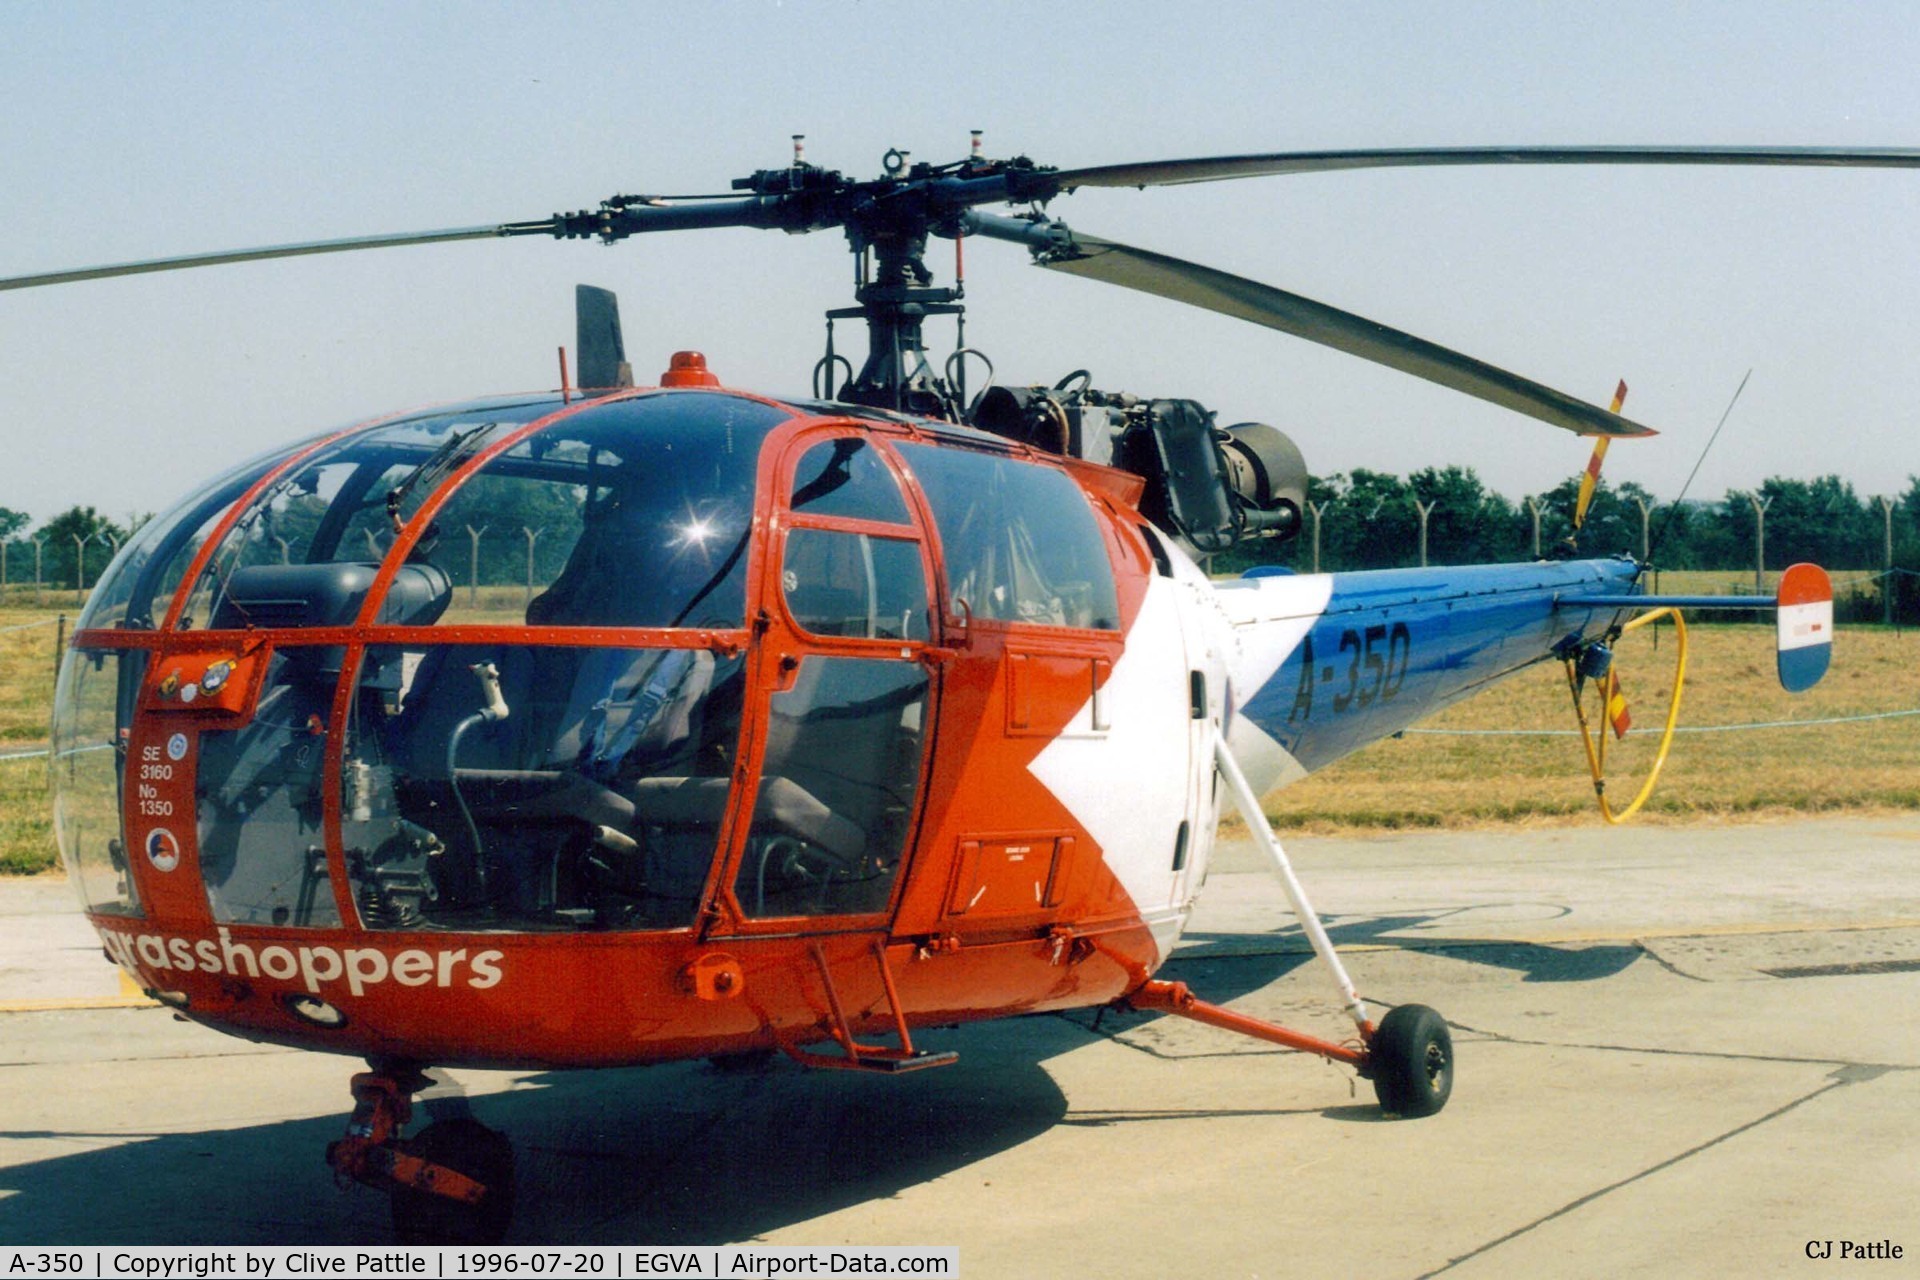 A-350, Sud SE-3160 Alouette III C/N 1350, Scanned from print. Grasshoppers 'A-350' of RNethAF 302 Sqn at RAF Fairford '96